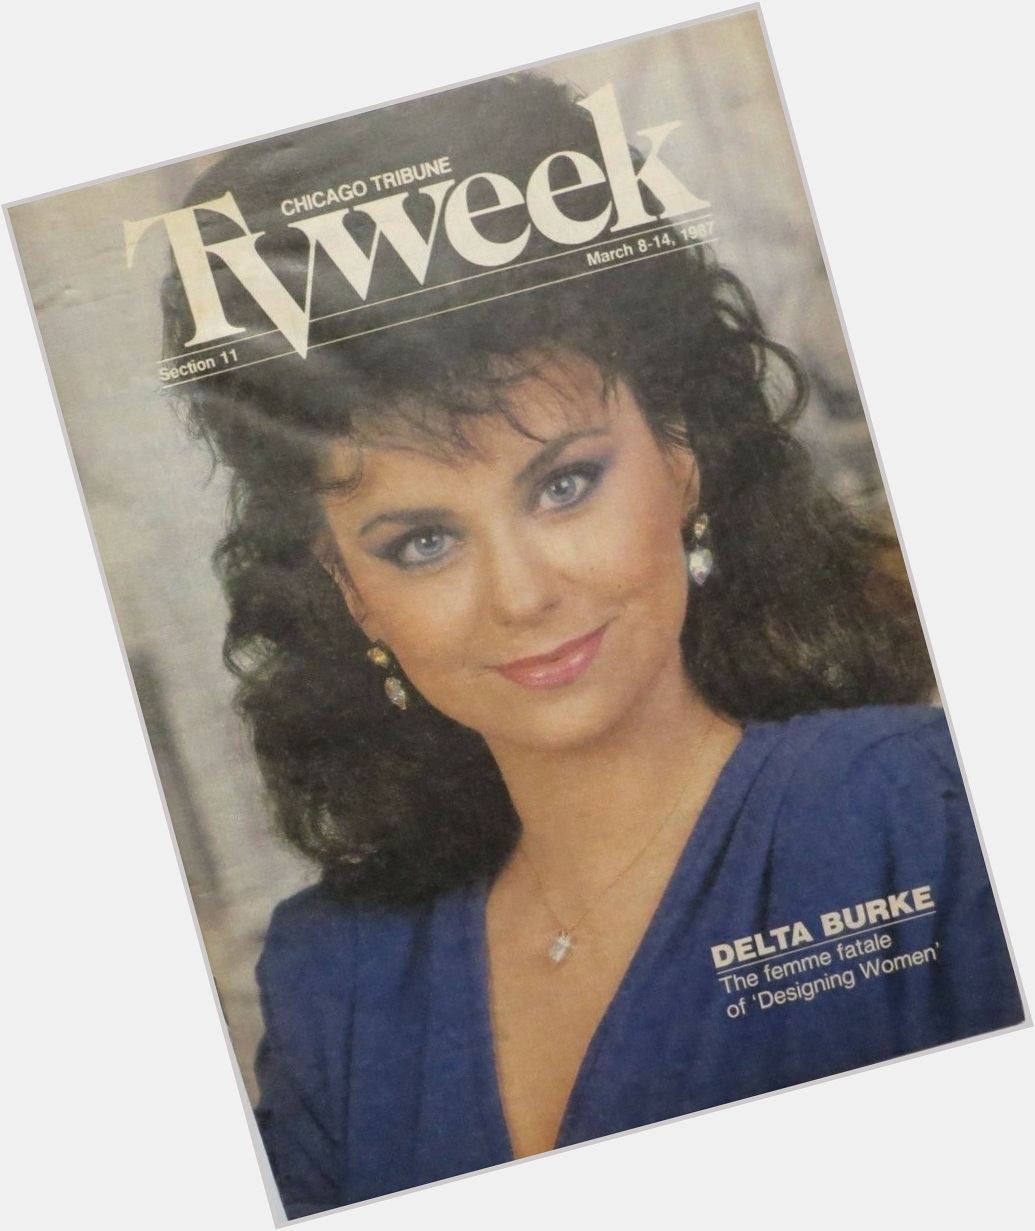 Happy Birthday to Delta Burke, born on this day in 1956
Chicago Tribune TV Week.  March 8-14, 1987 